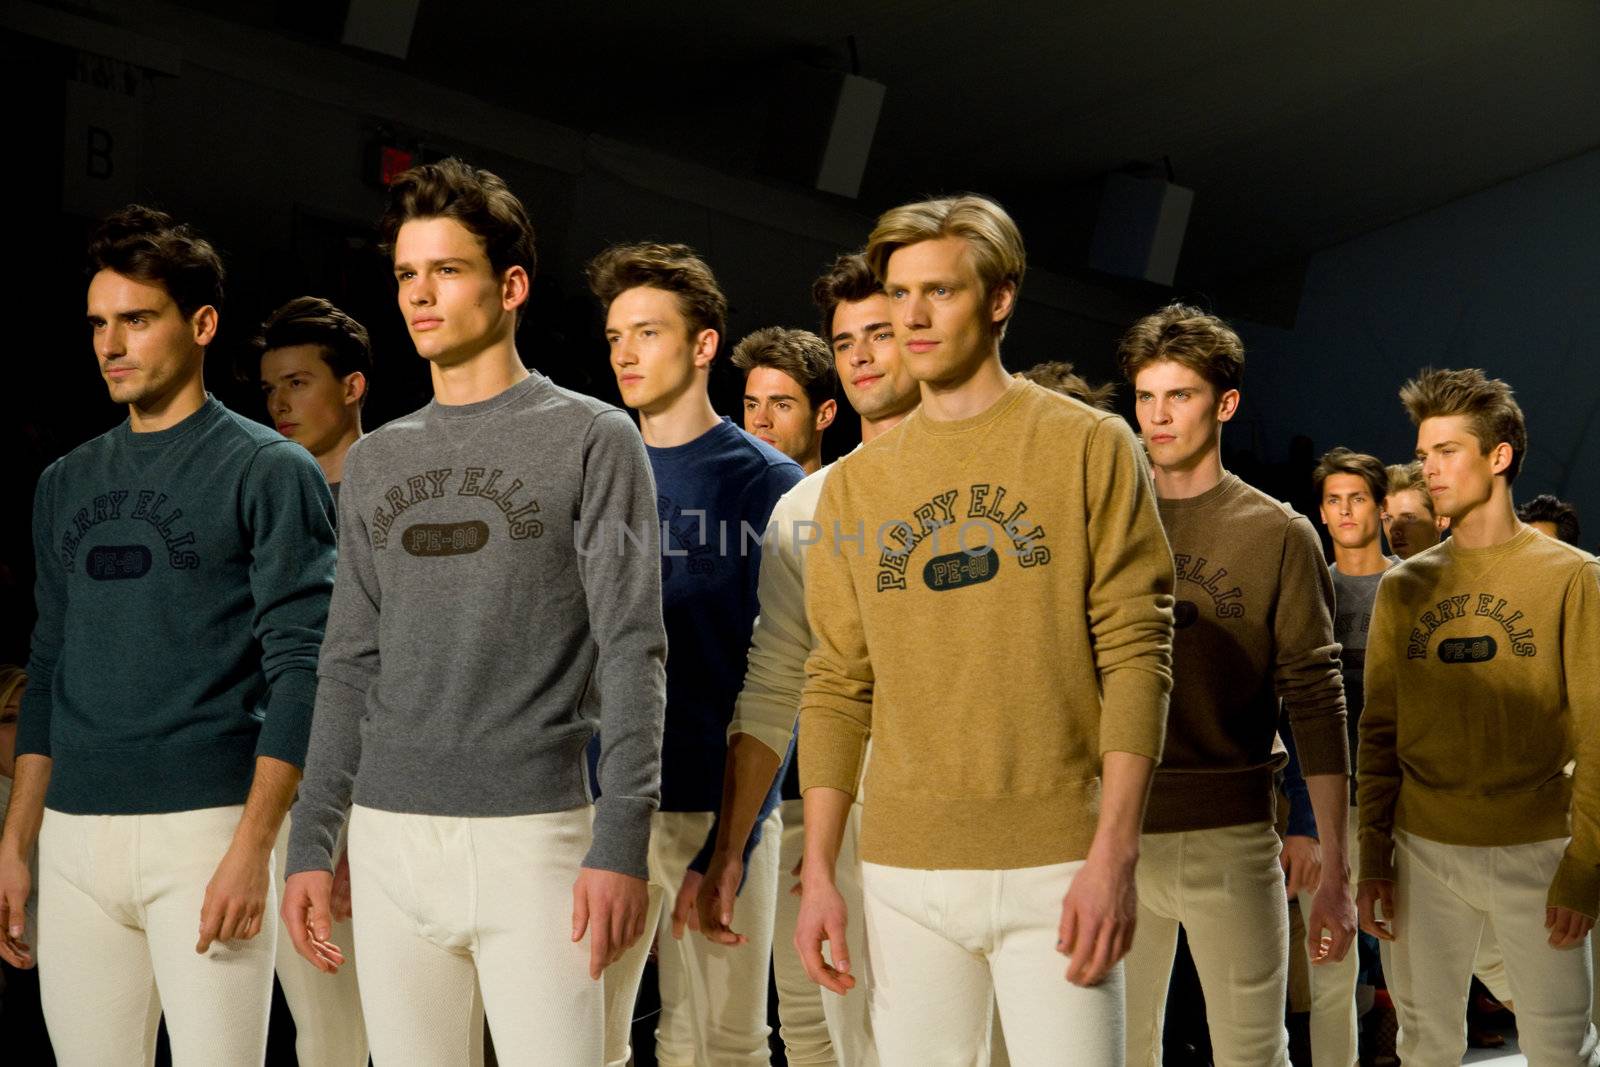 Perry Ellis Fall 2011 Collection New York by photopro